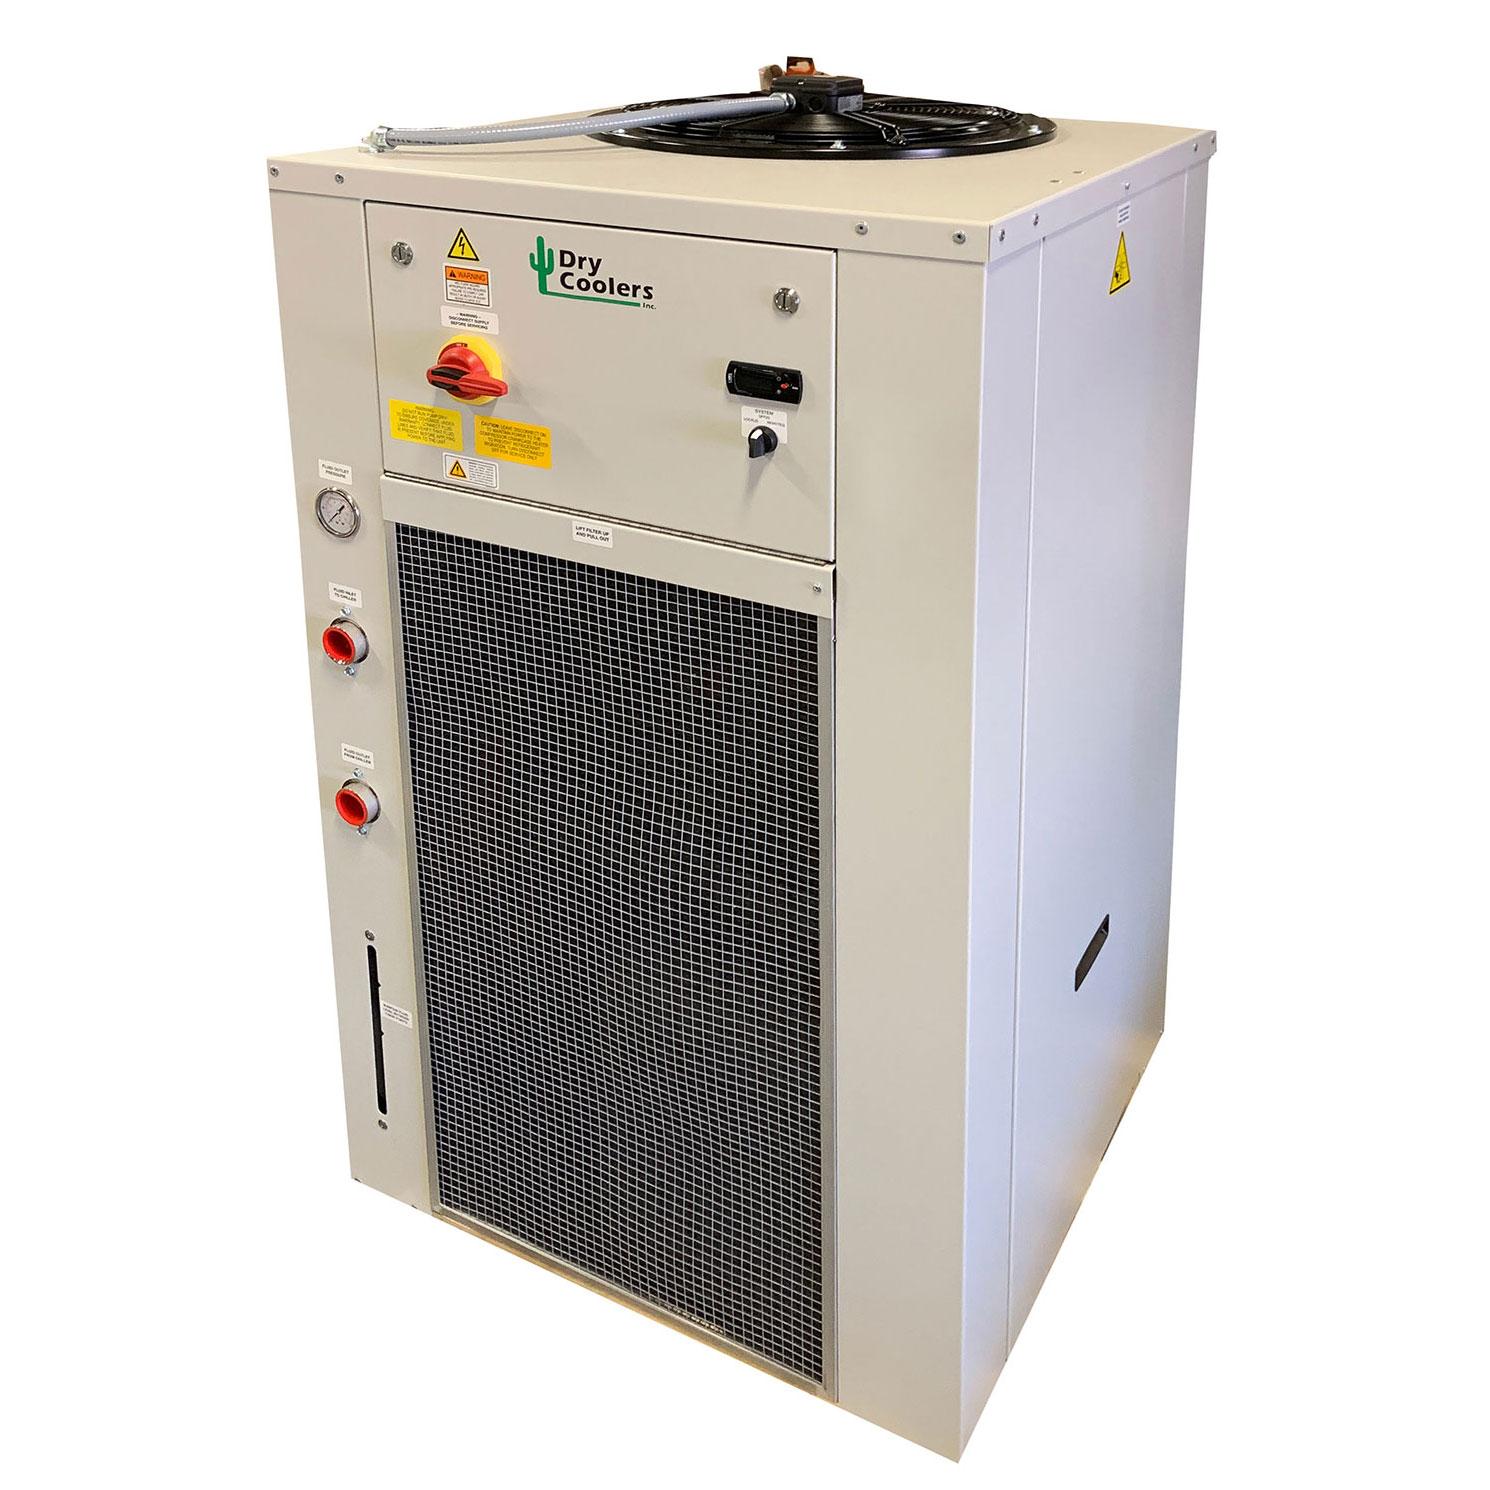 Product Dry Coolers Omni-Chill PAC Series Chiller image